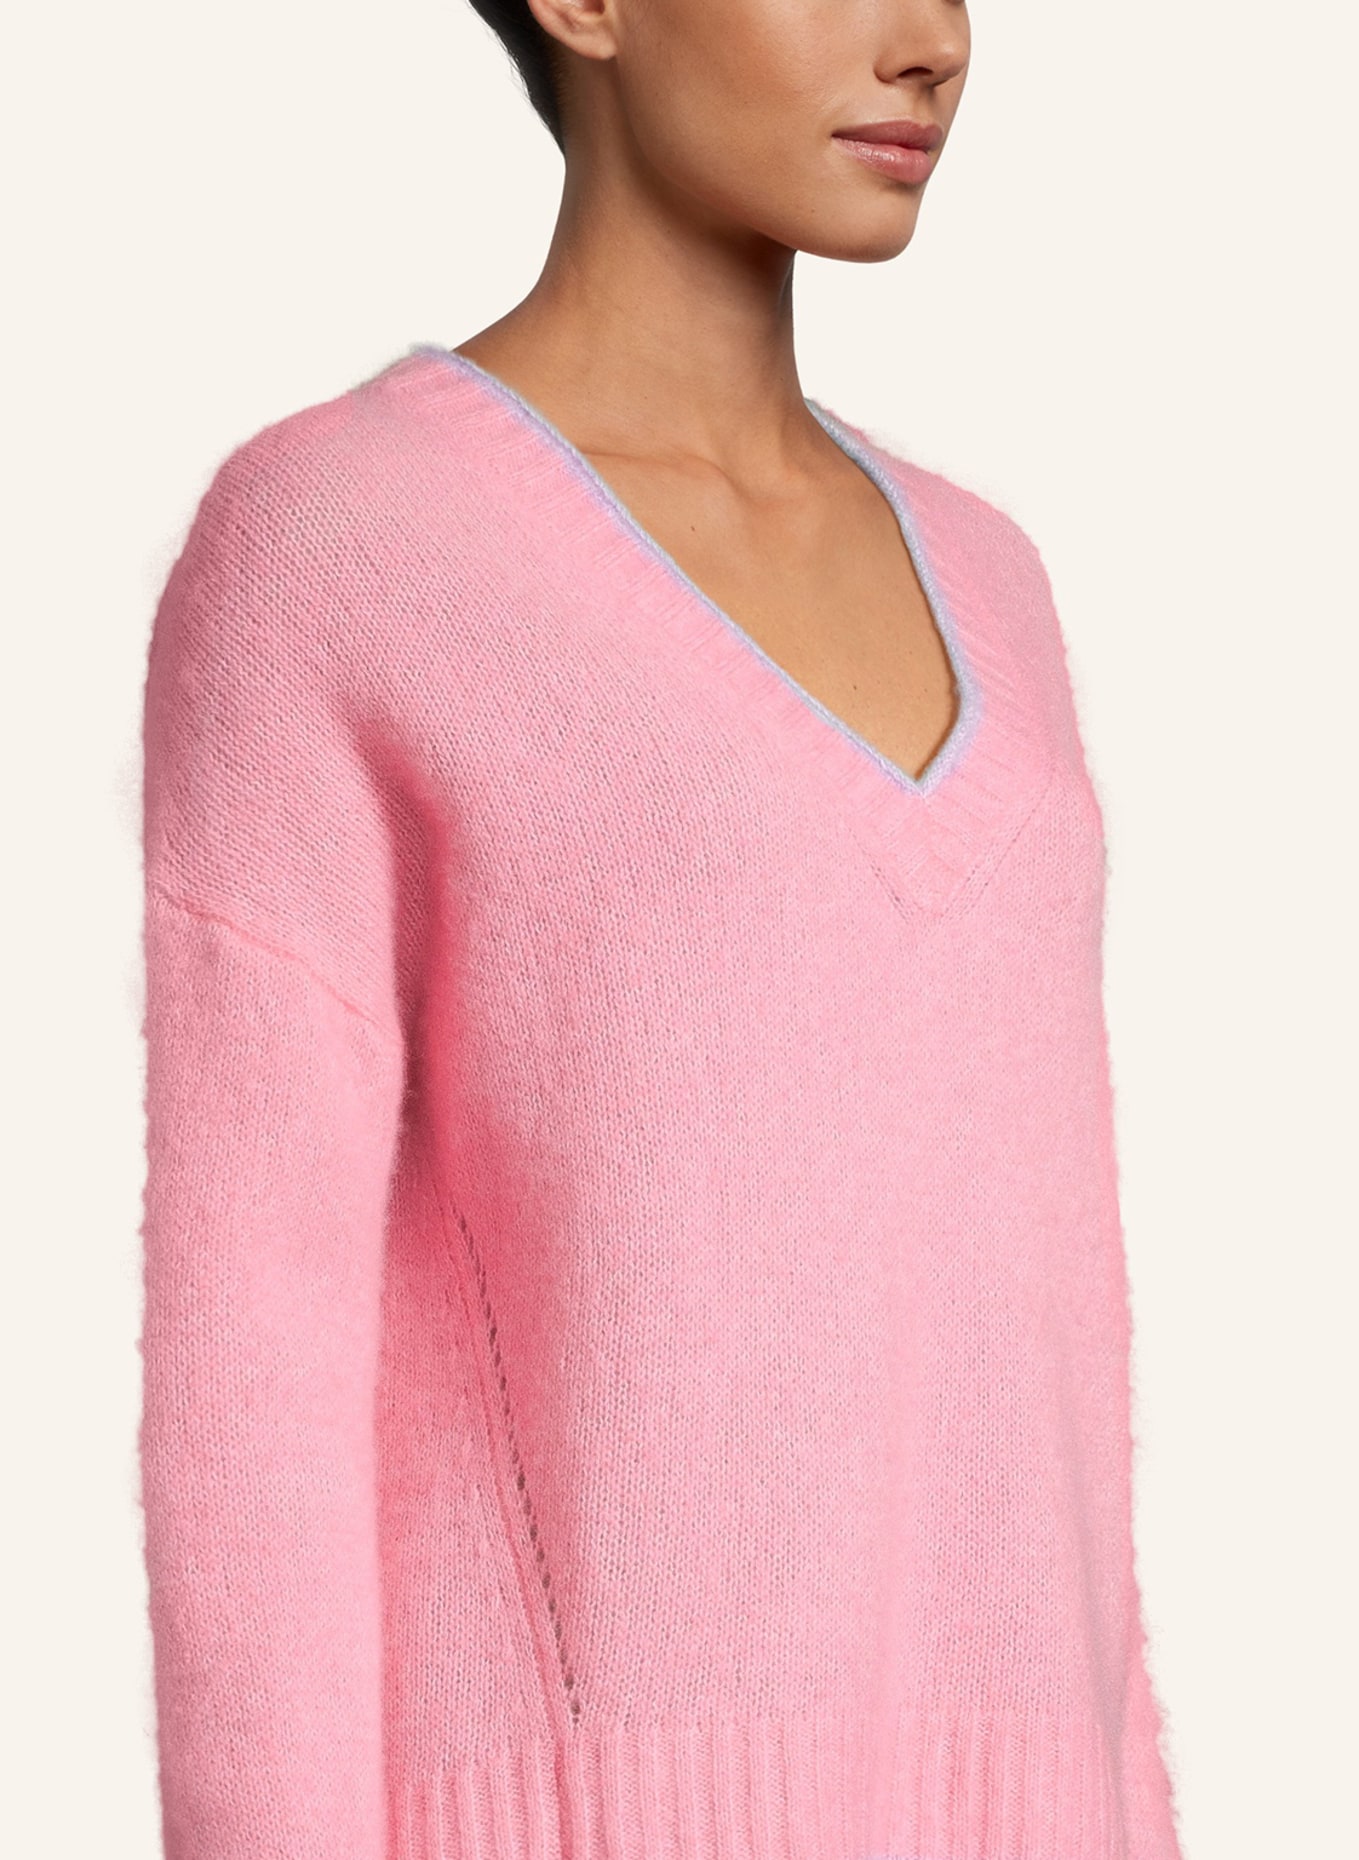 Princess GOES HOLLYWOOD Pullover mit Cashmere, Farbe: PINK (Bild 3)